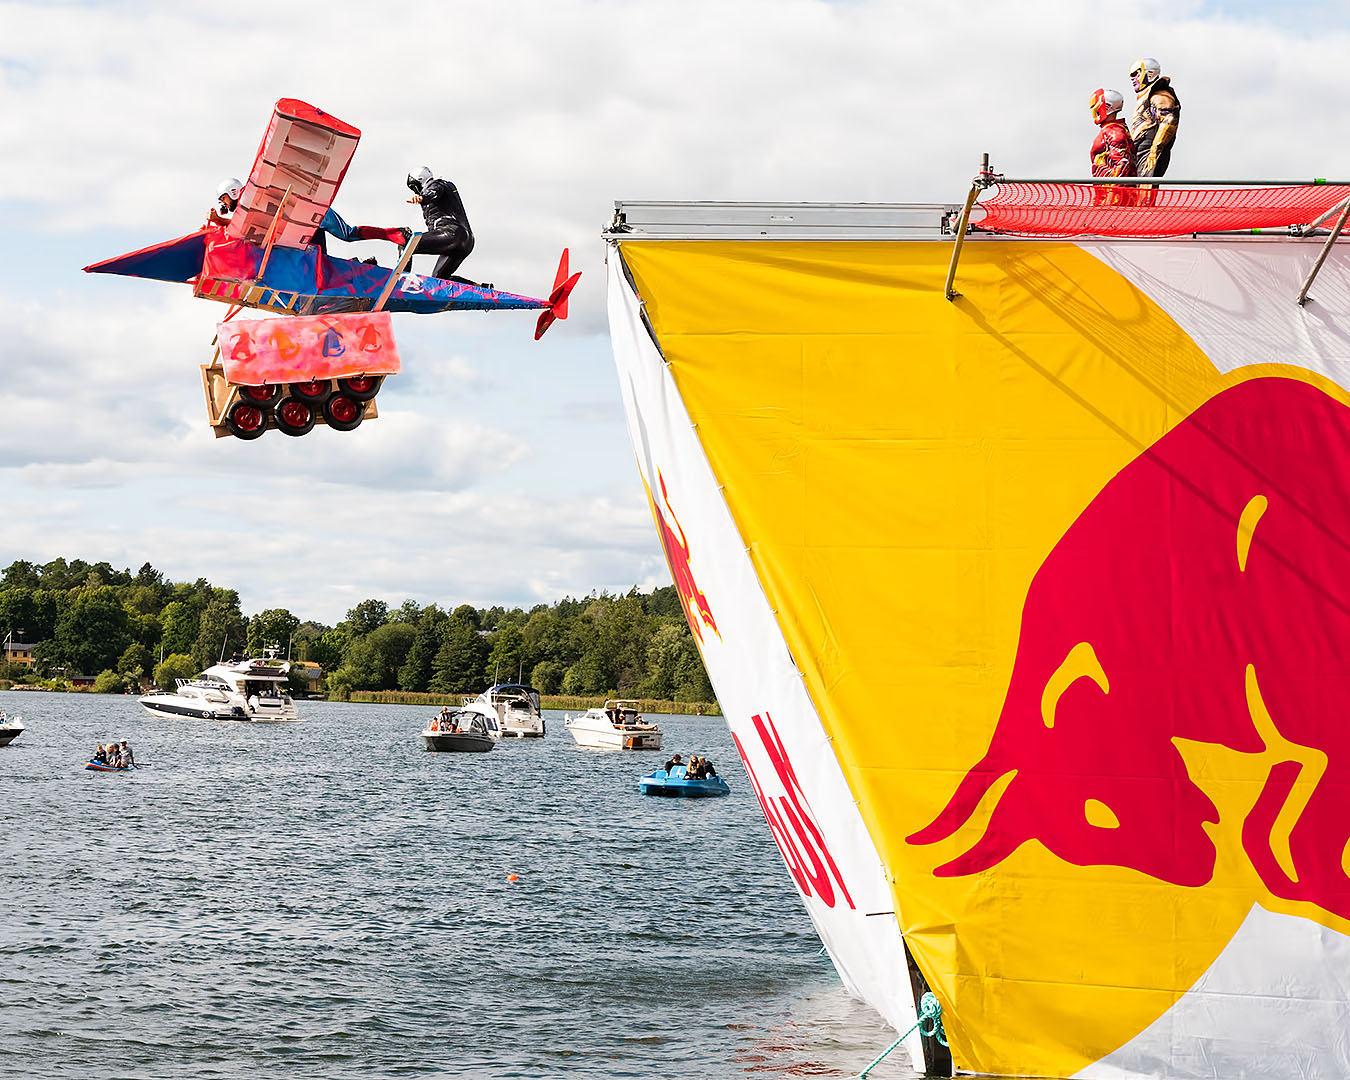 A competitor competes in Red Bull Flugtag.